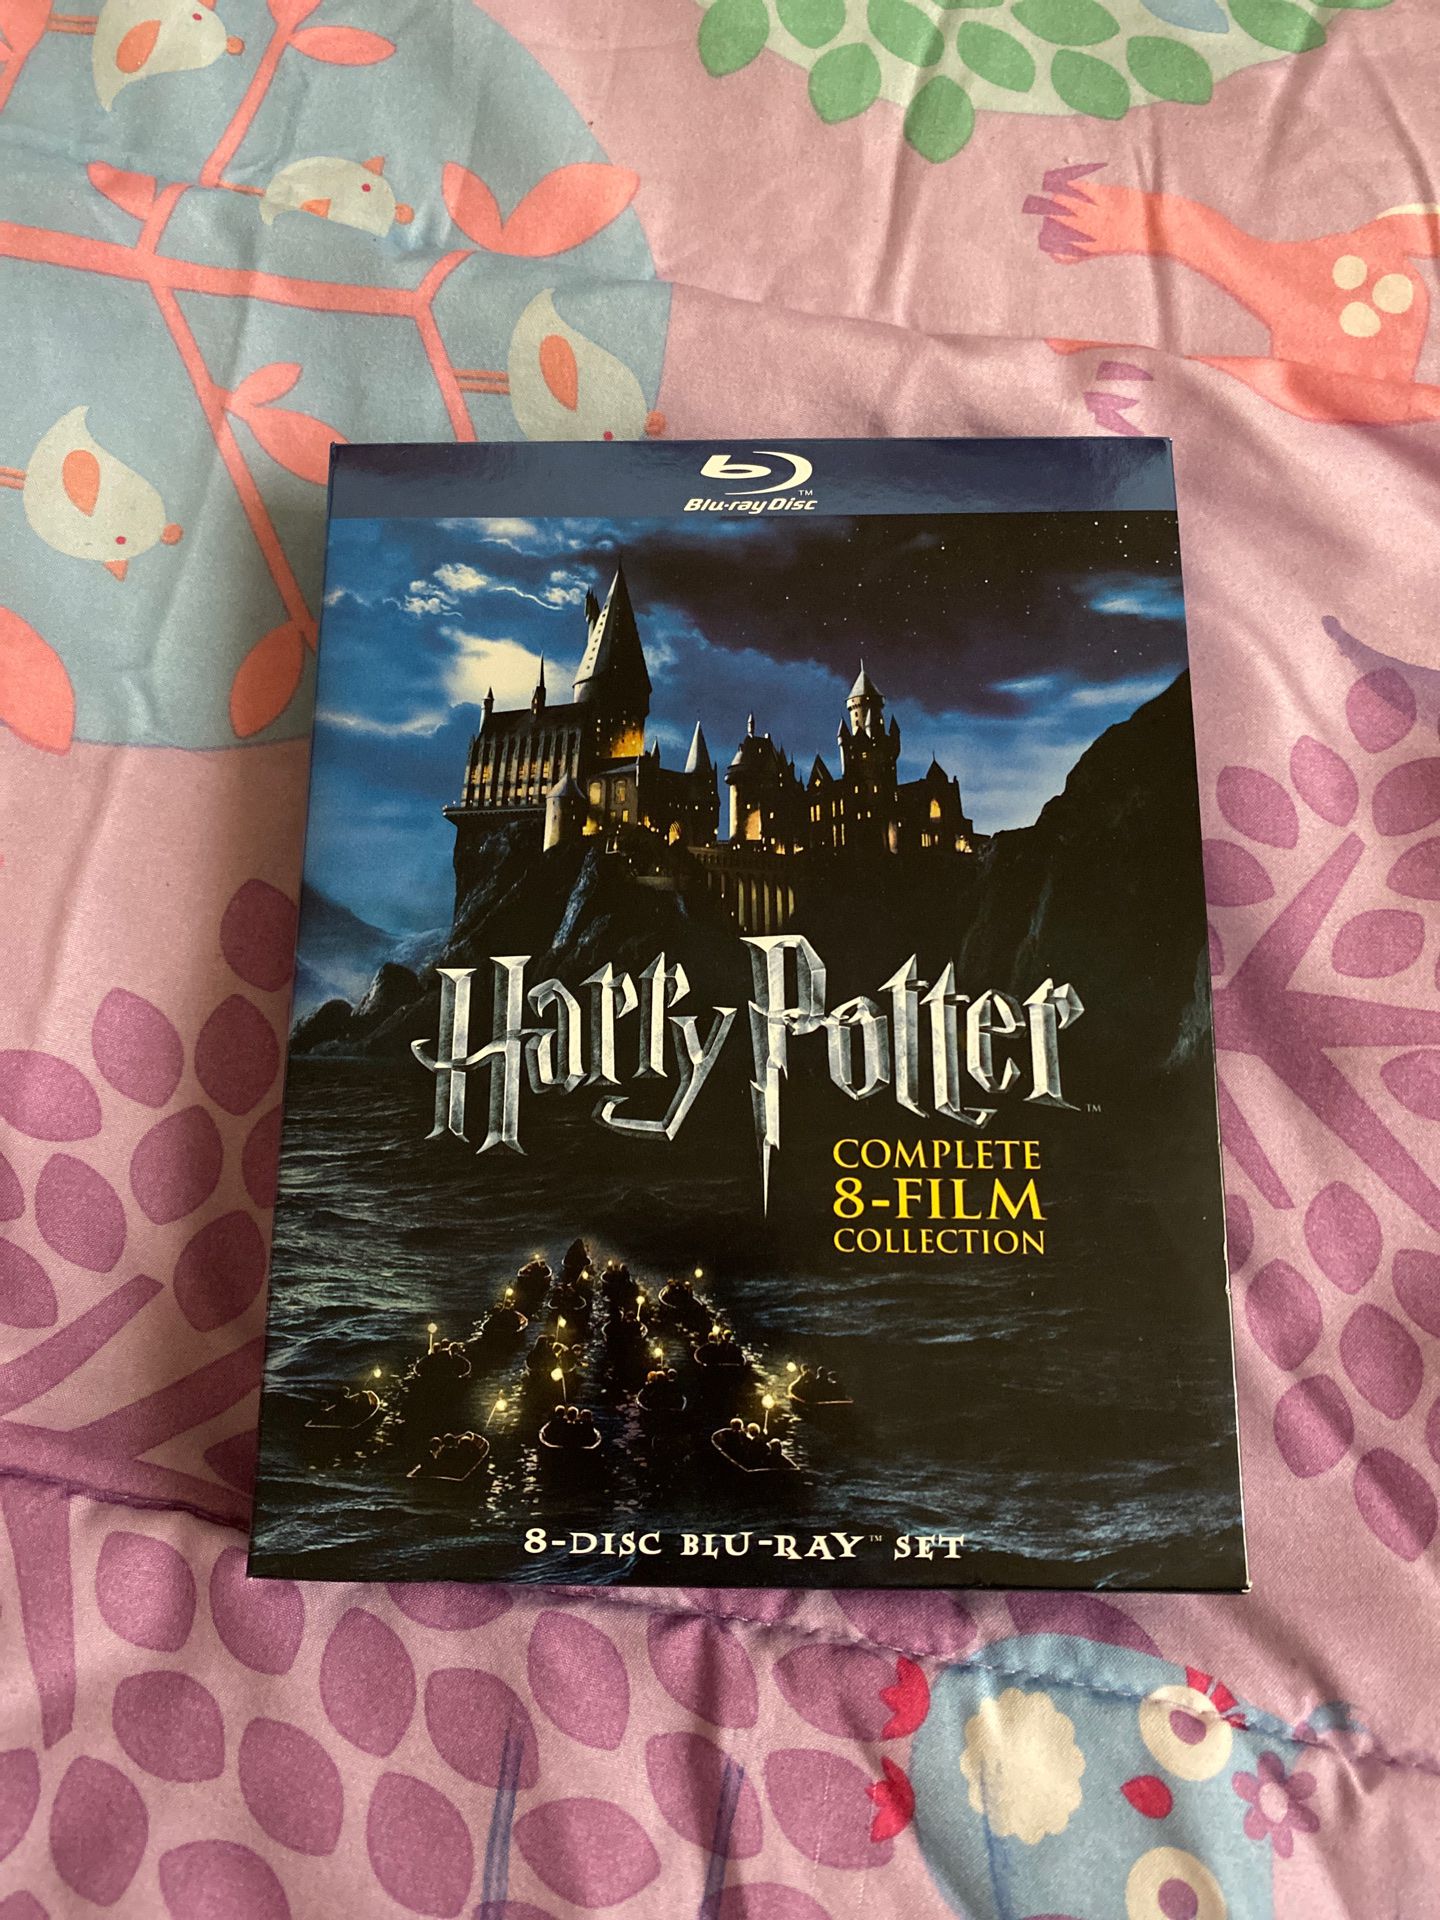 BRAND NEW Harry Potter 8-movie collection